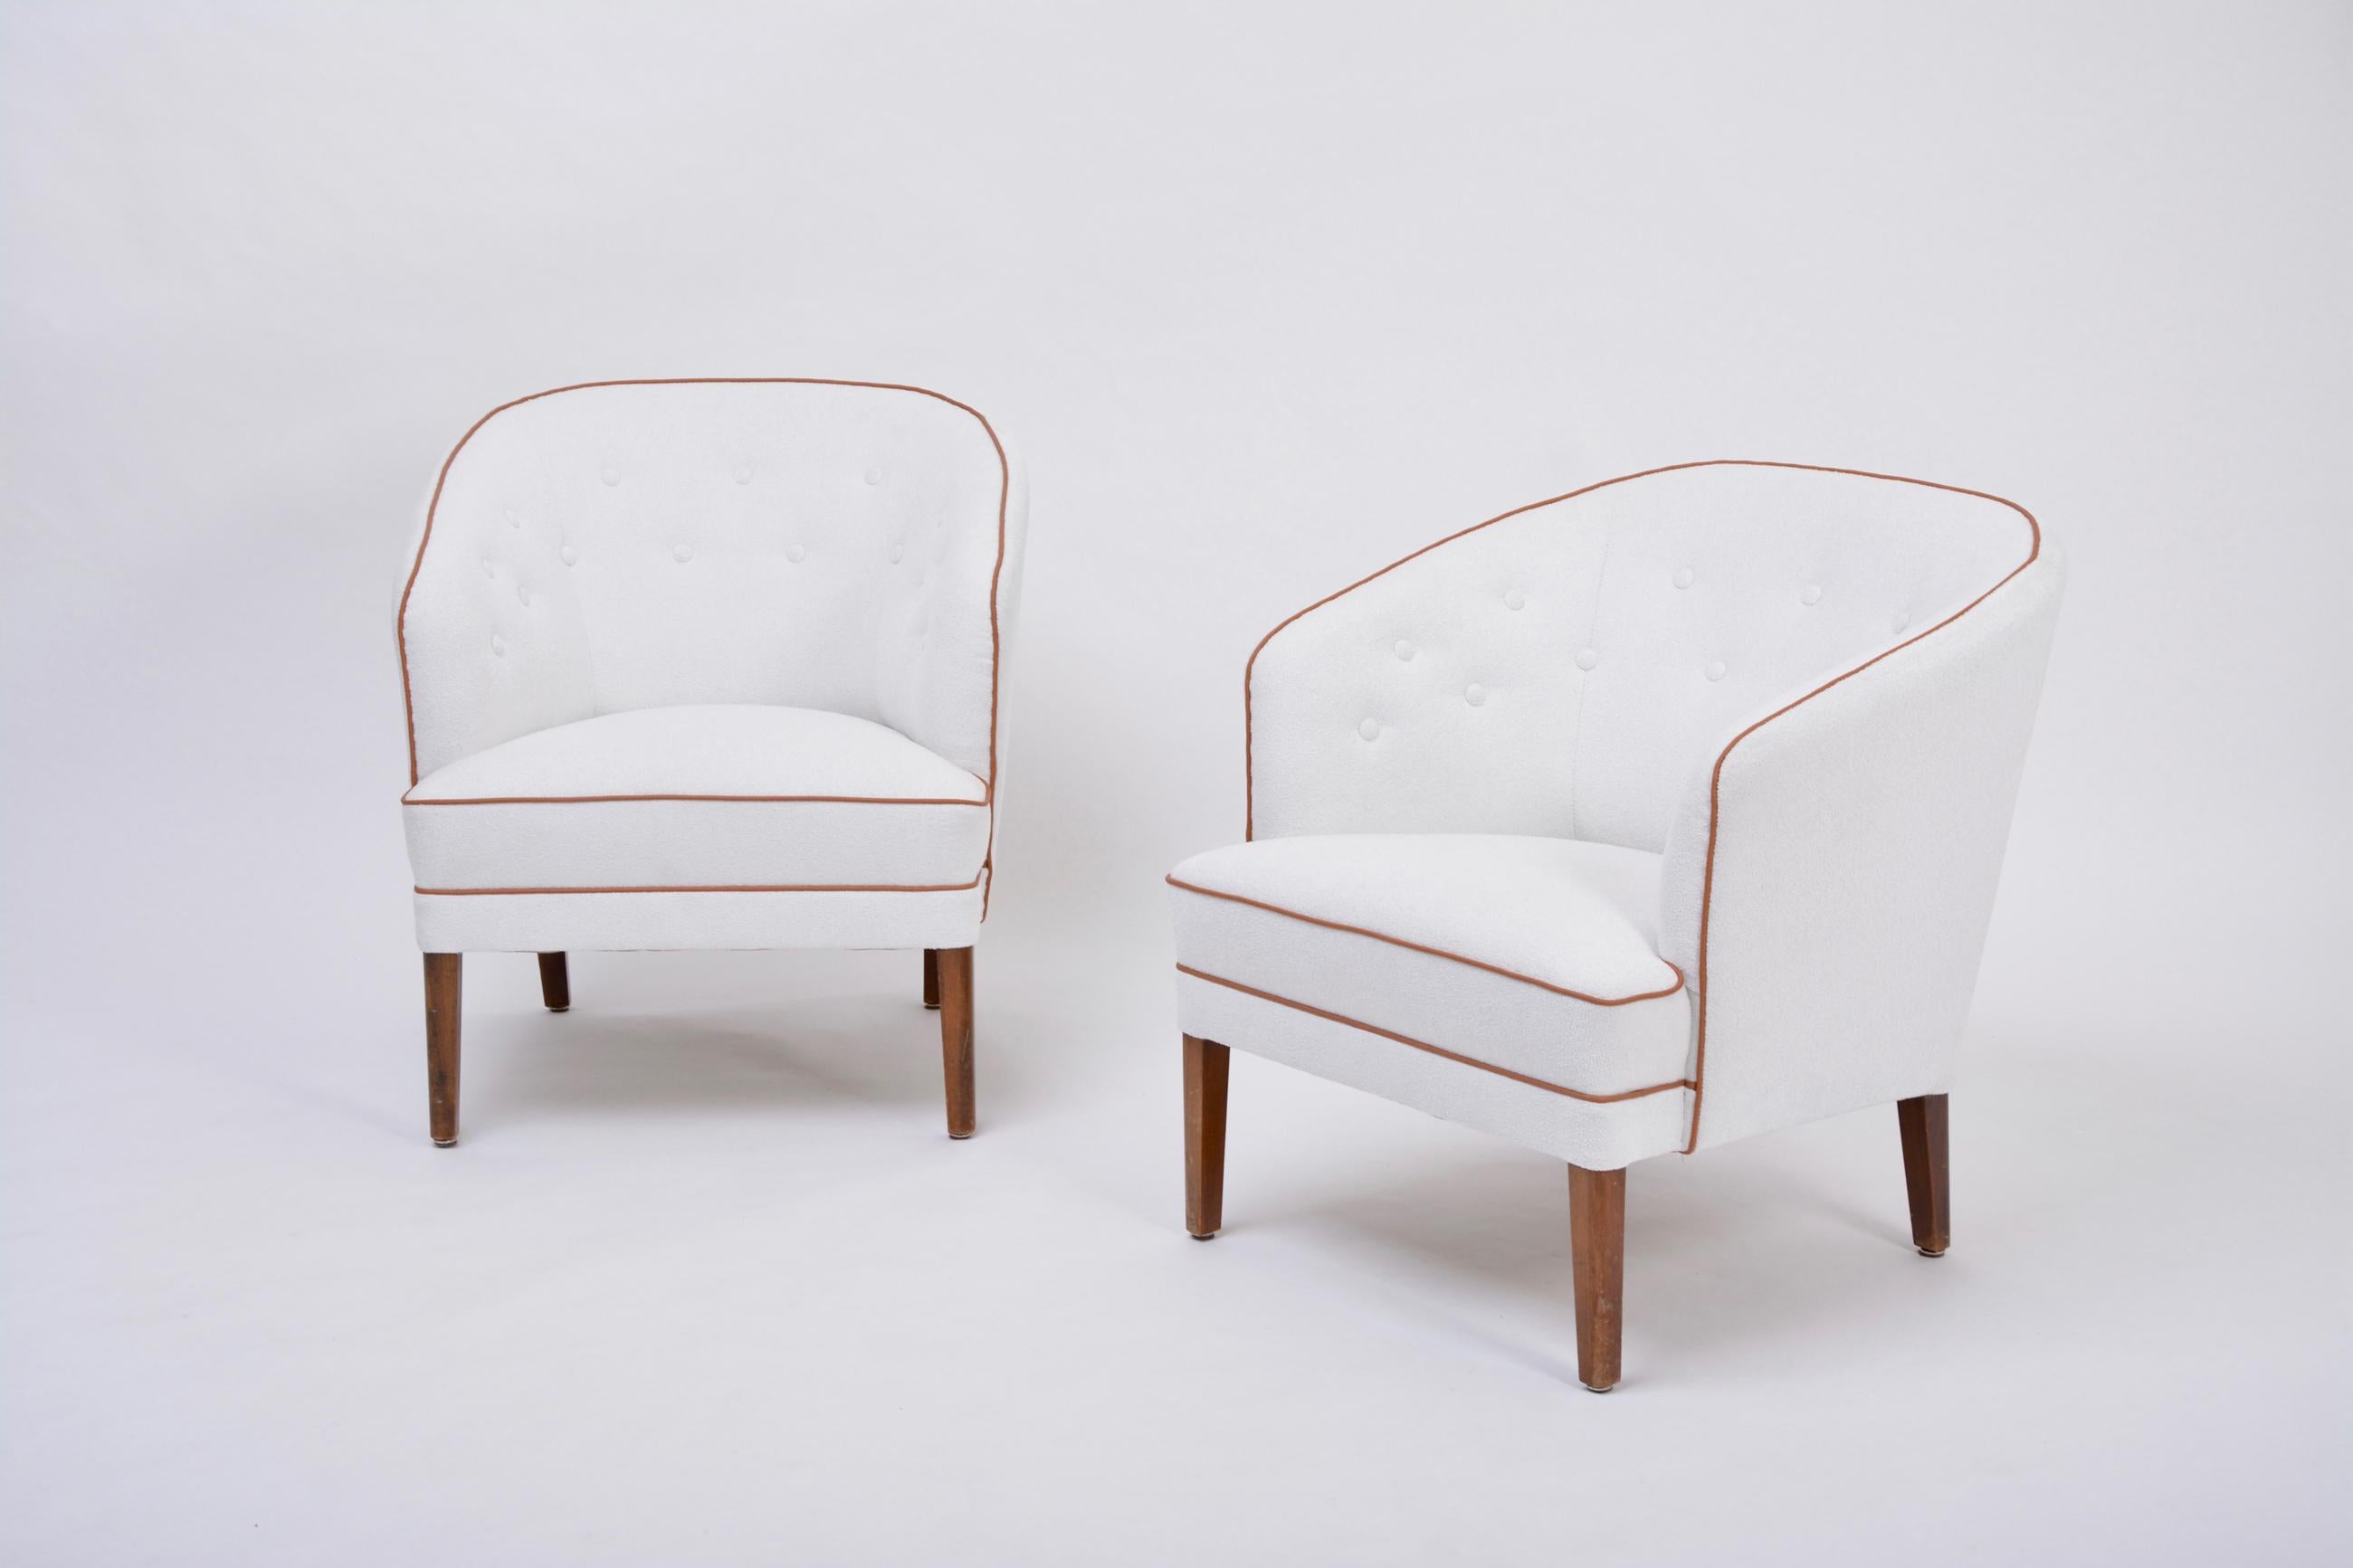 Pair of white reupholstered Danish mid-century armchairs by Ludvig Pontoppidan

Very rare set of two armchairs with elegant curves designed and produced by Danish master craftsman Ludvig Pontoppidan. The chairs are in excellent condition, as they